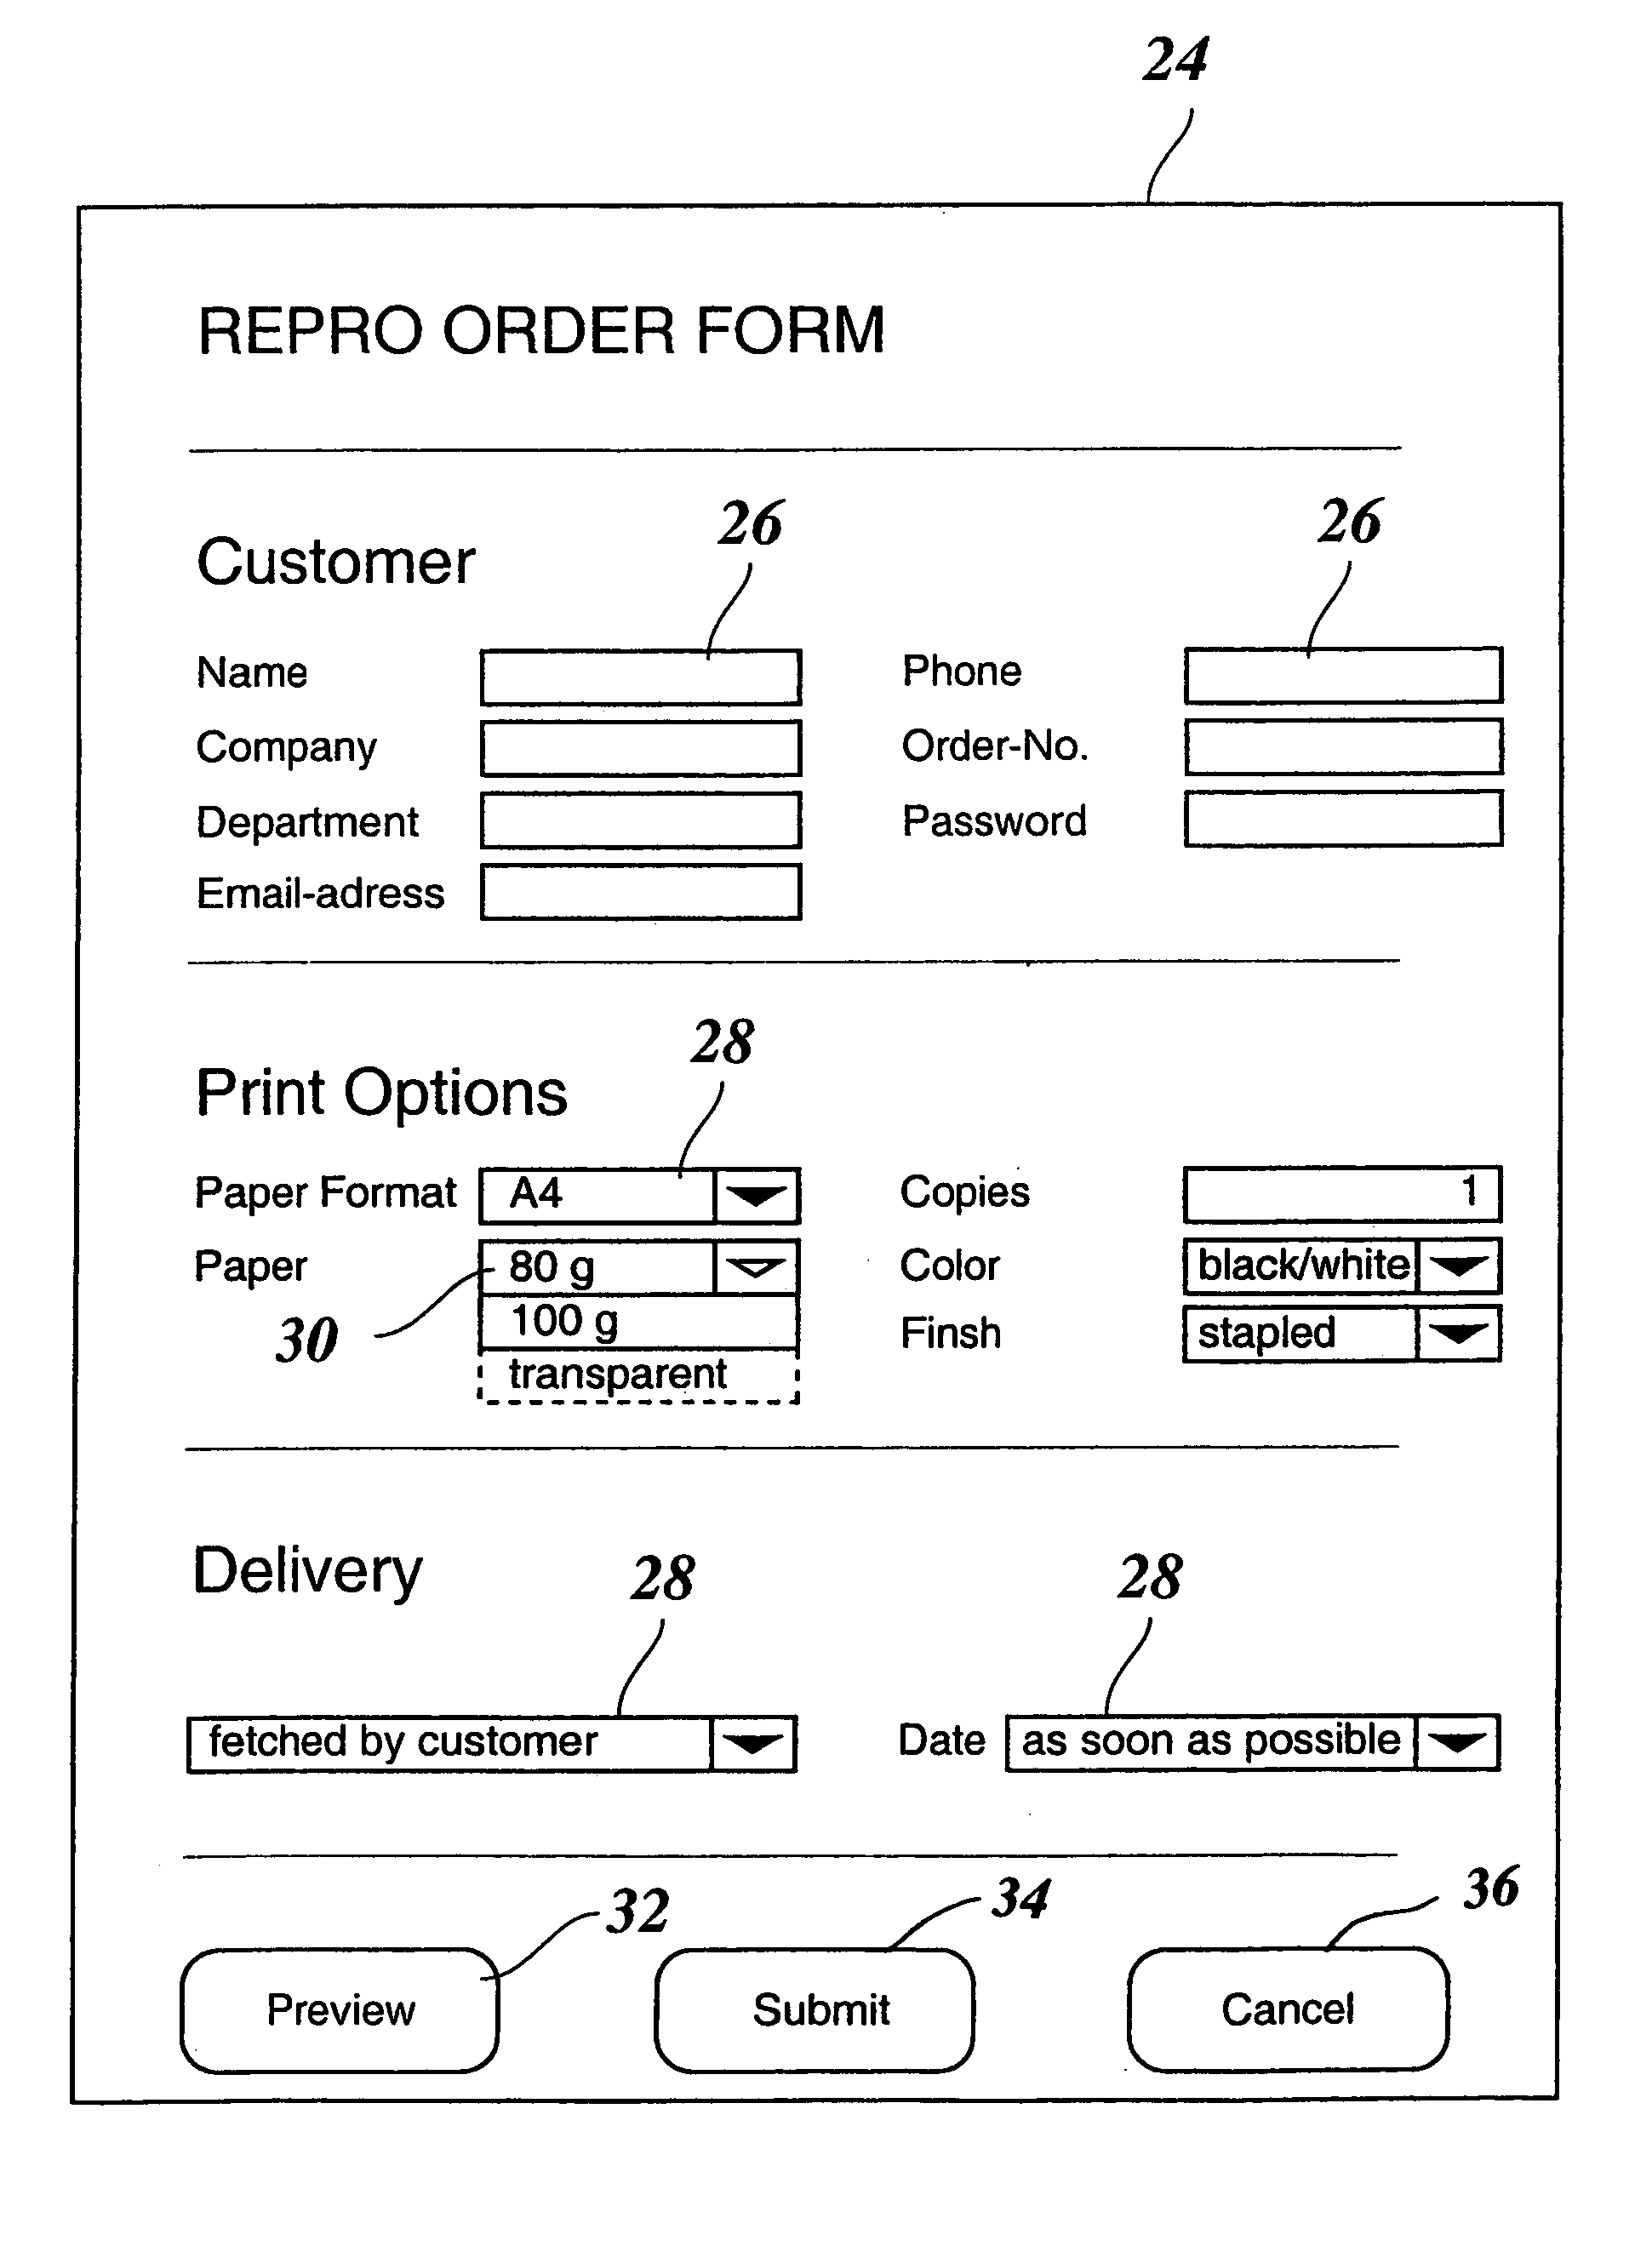 Method and system for submitting jobs to a reproduction center